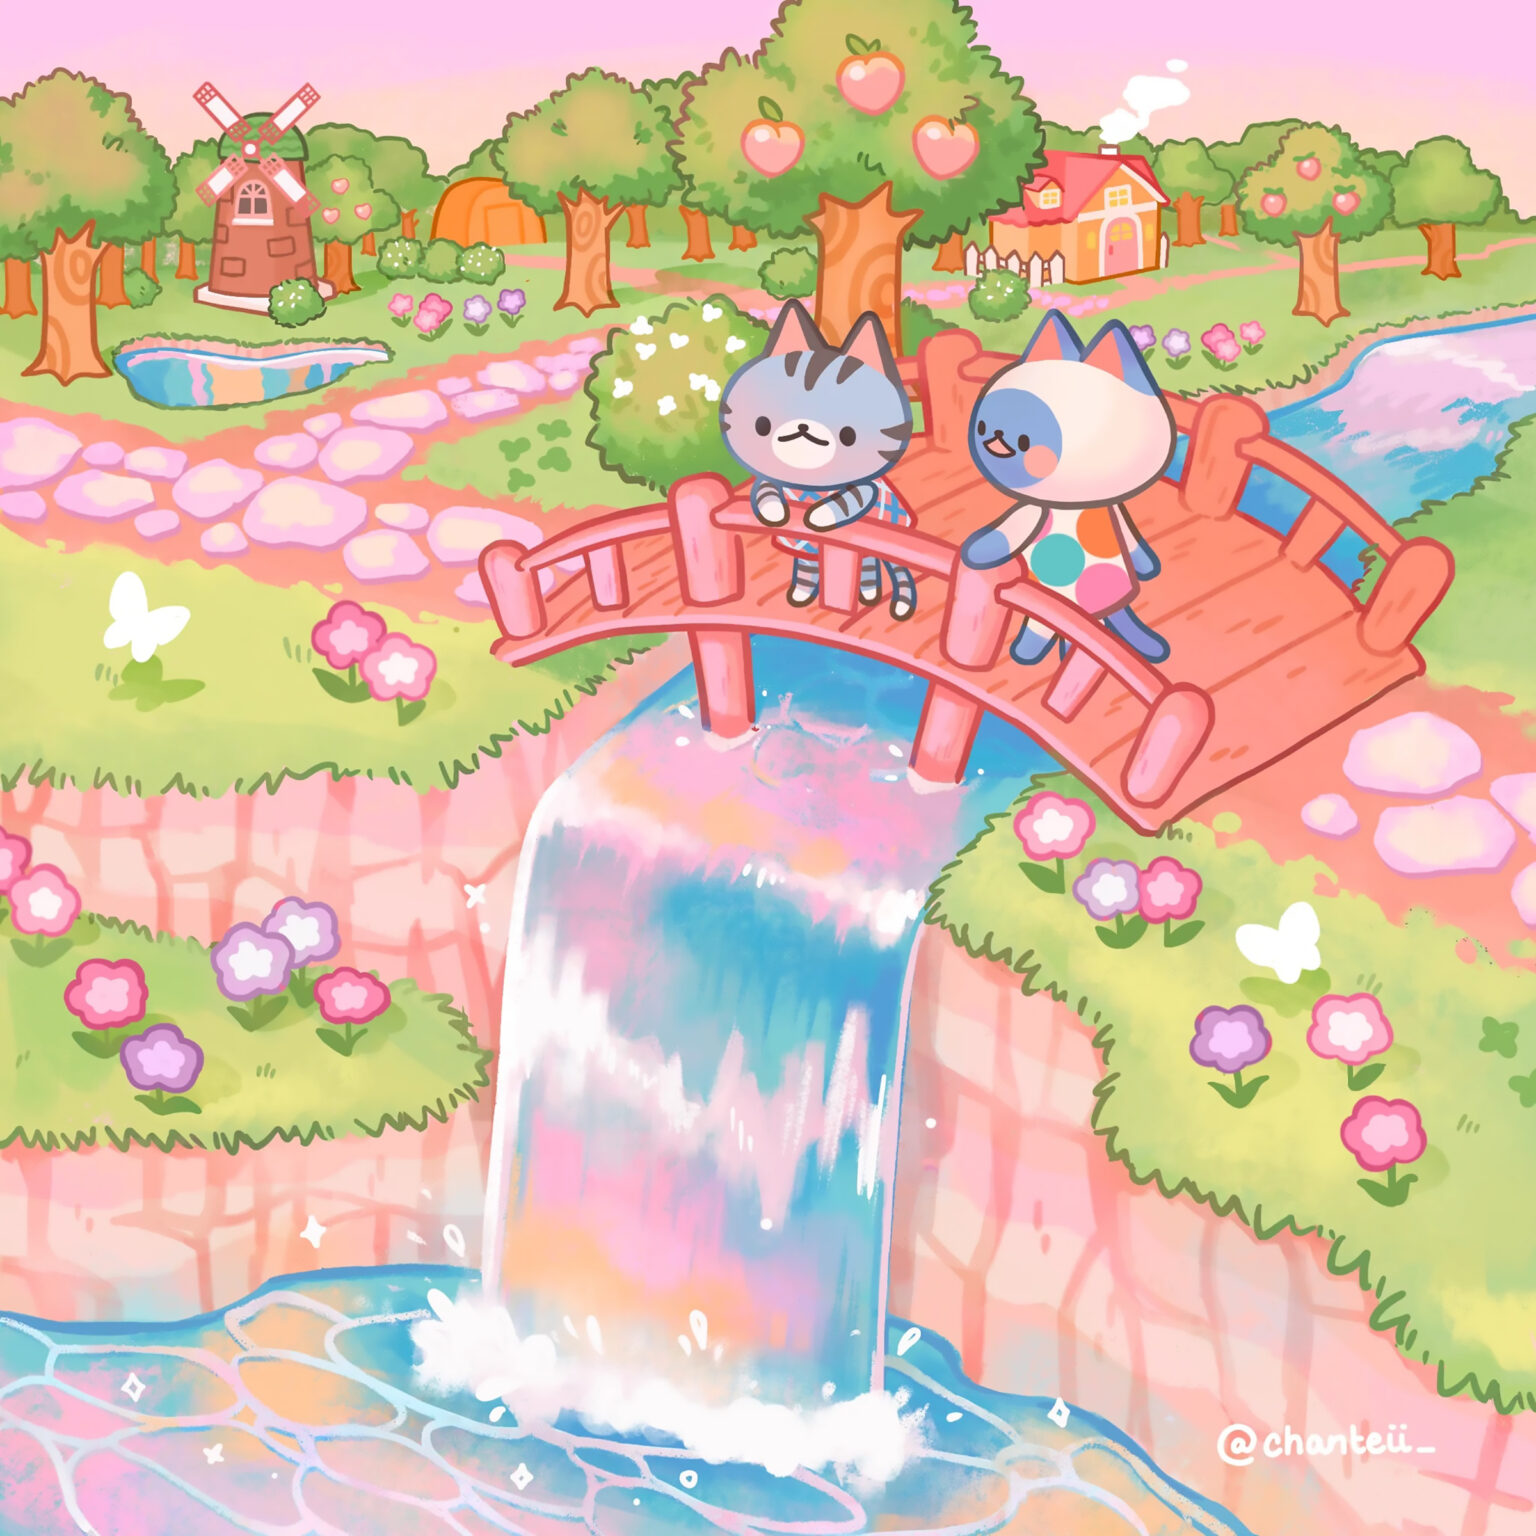 Cute Animal Crossing Background Wallpaper By Chanteii